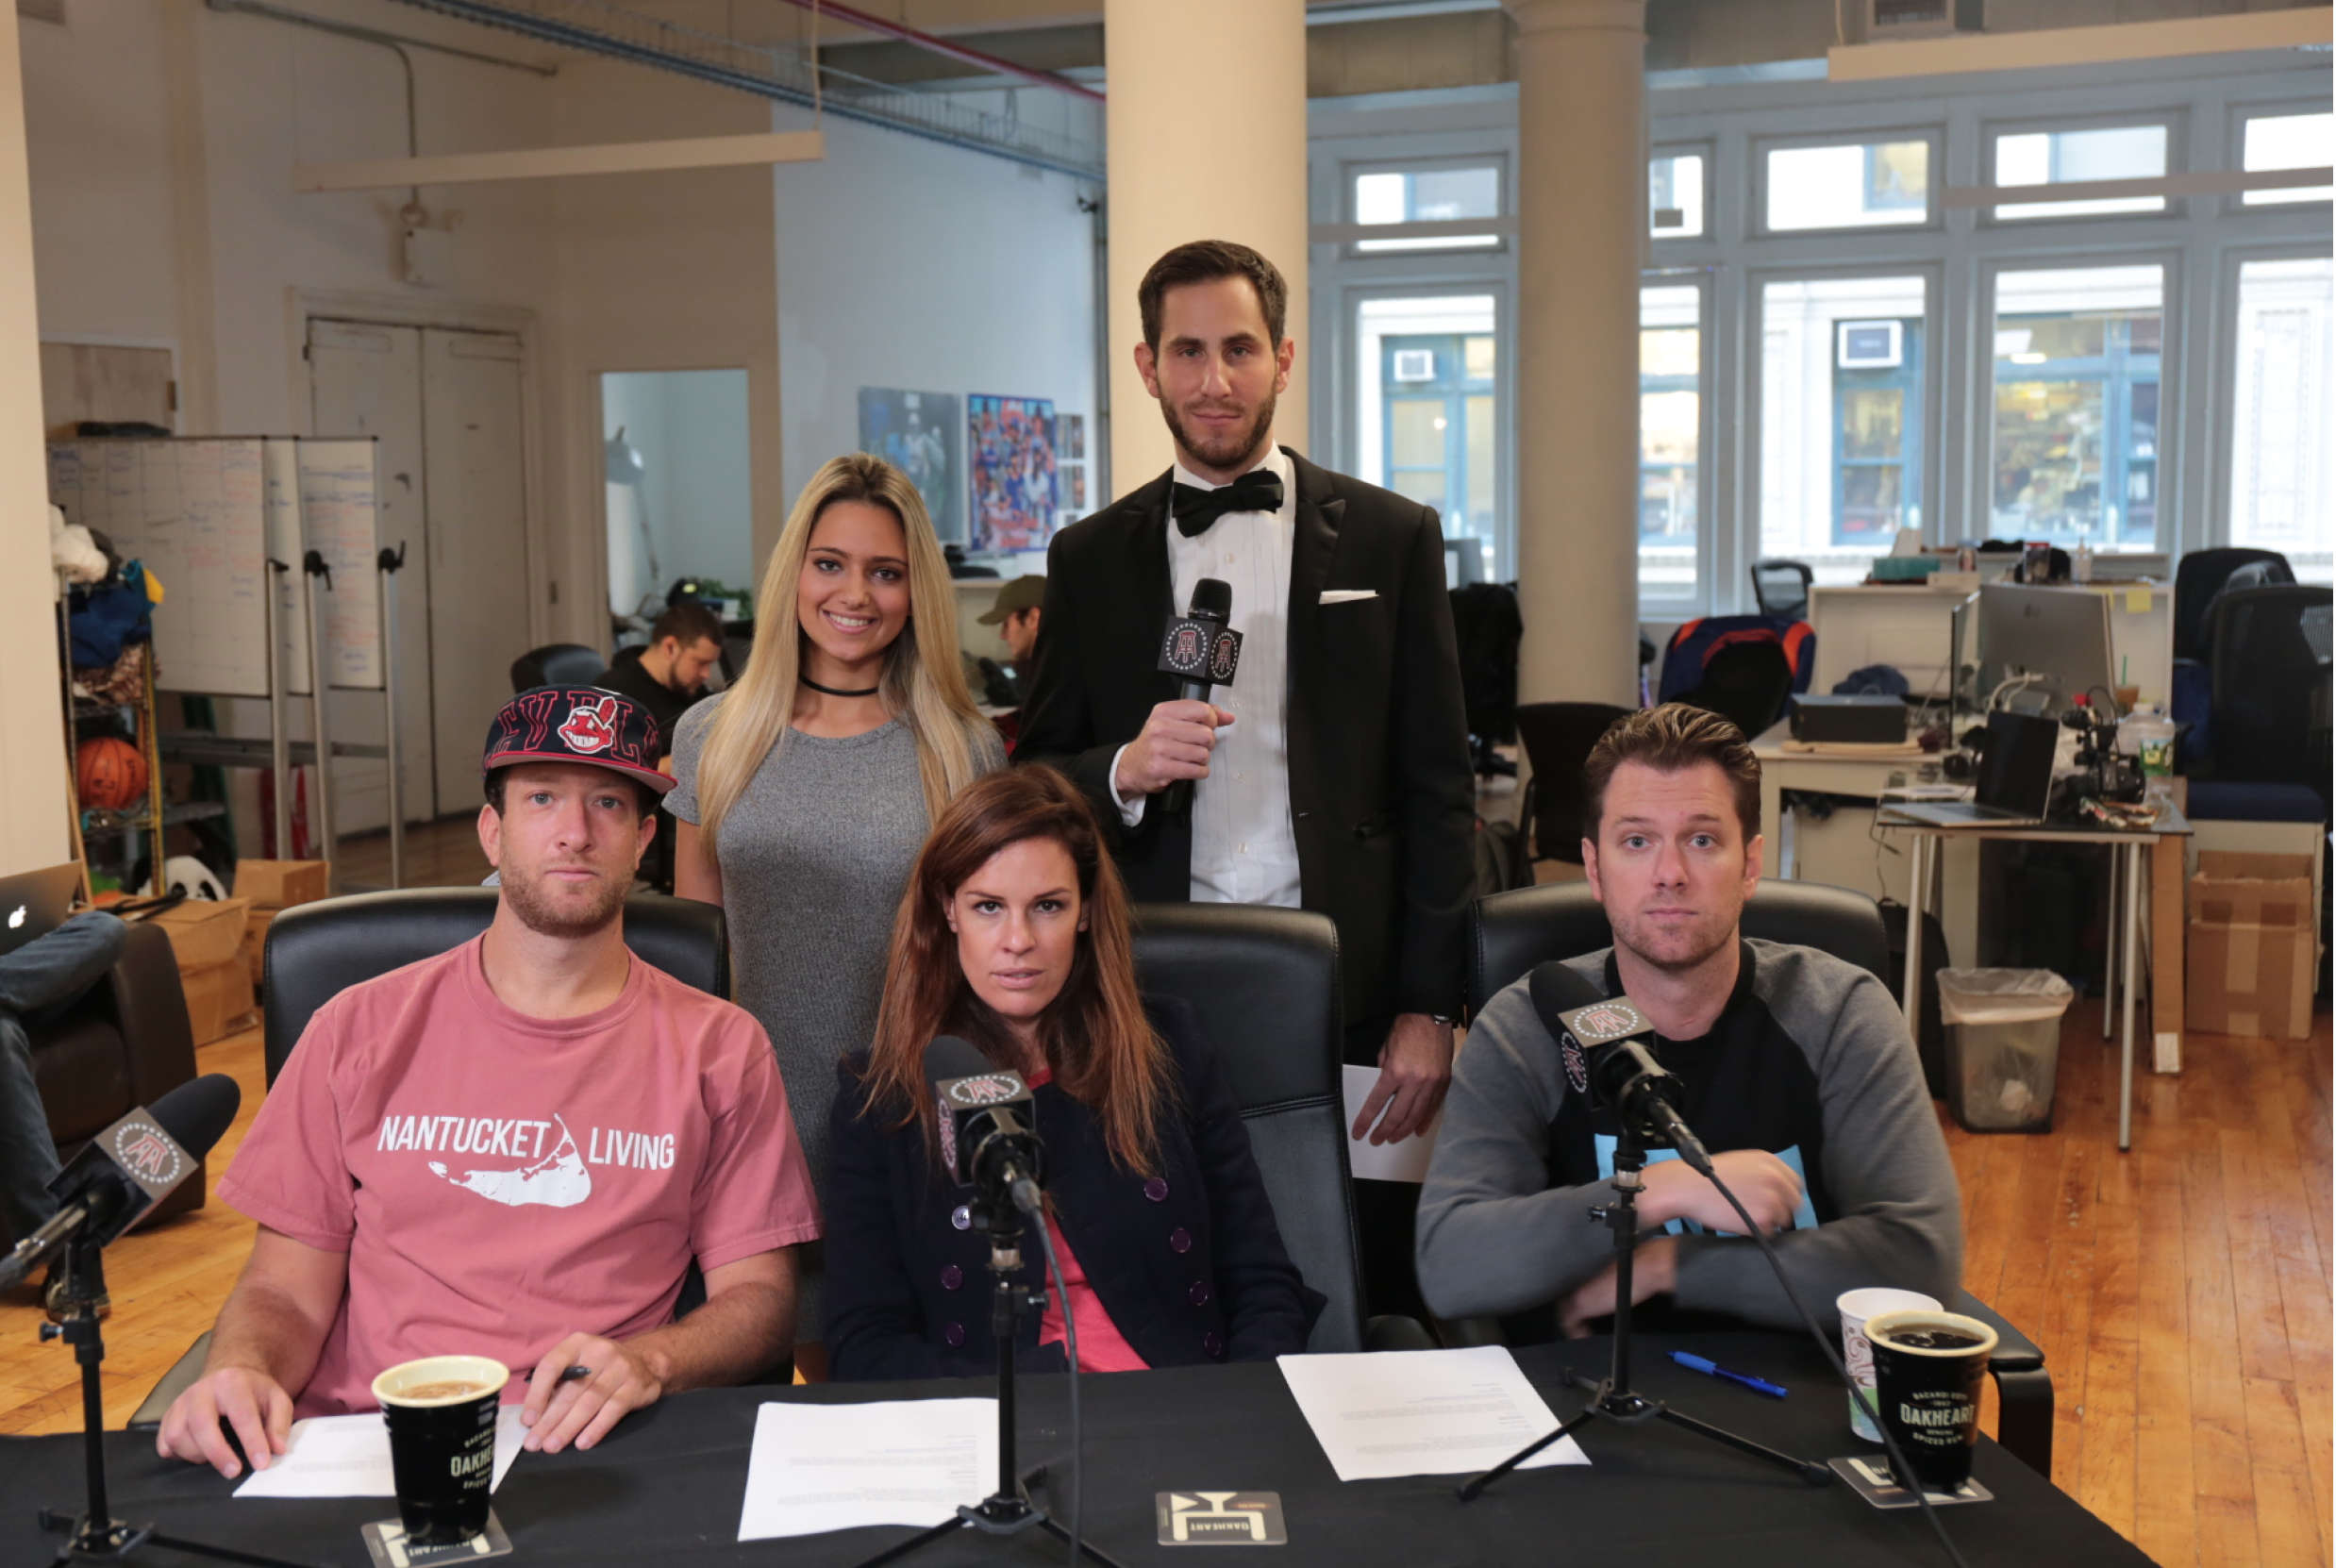 Barstool Sports CEO on what media brands are doing wrong